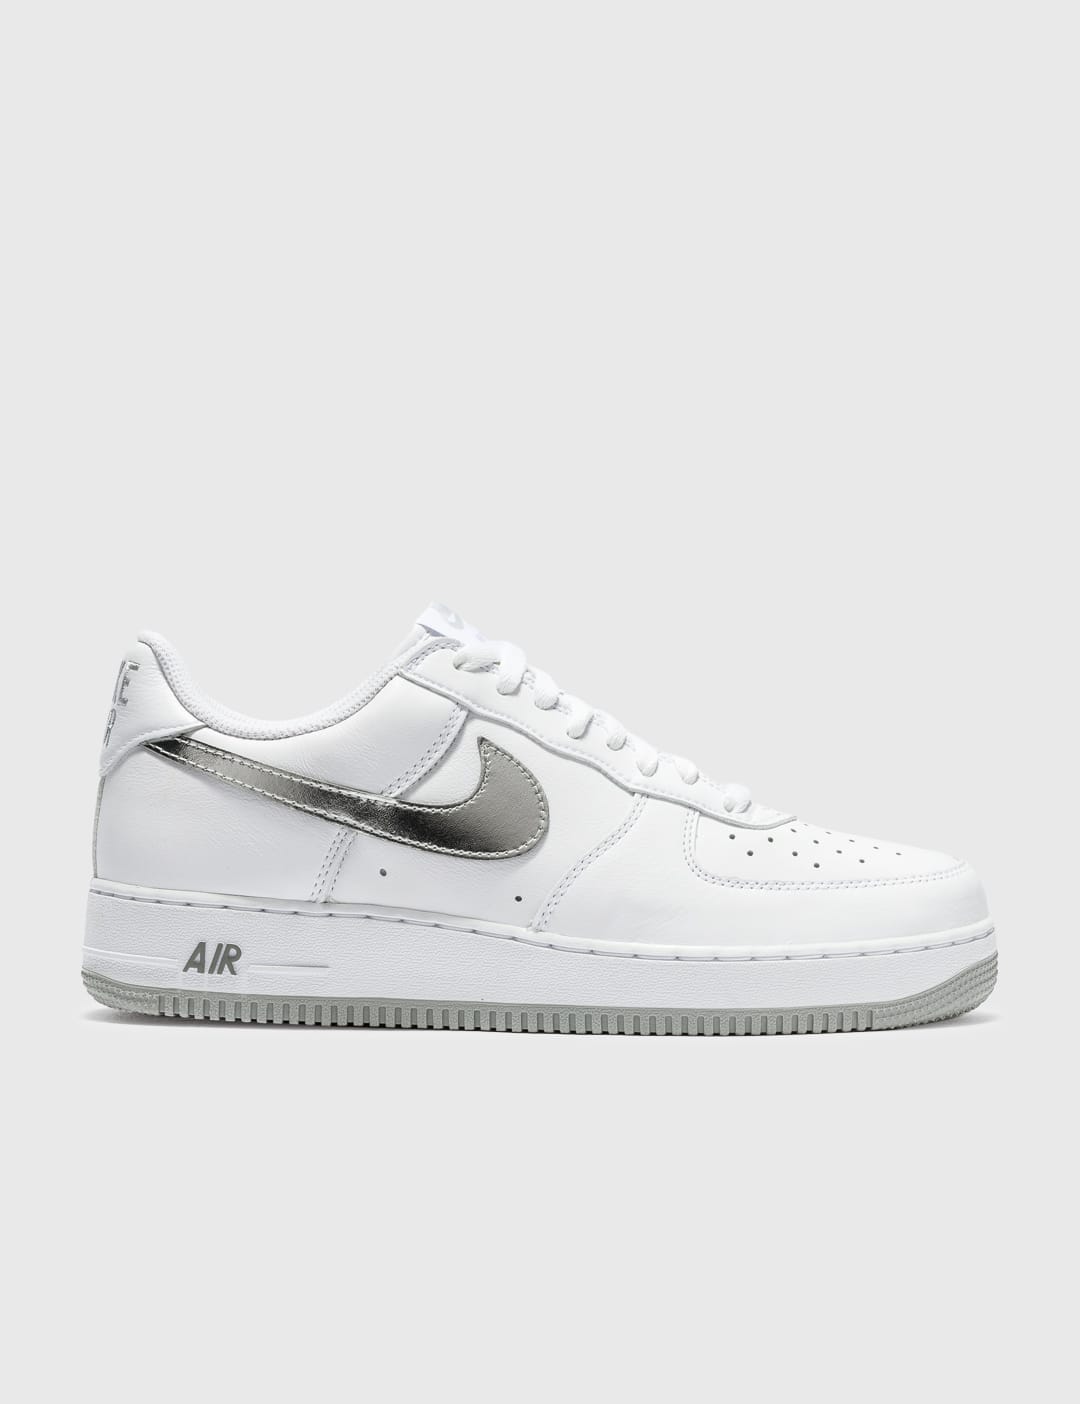 Nike - Nike Air Force 1 Low Retro | HBX - Globally Curated Fashion